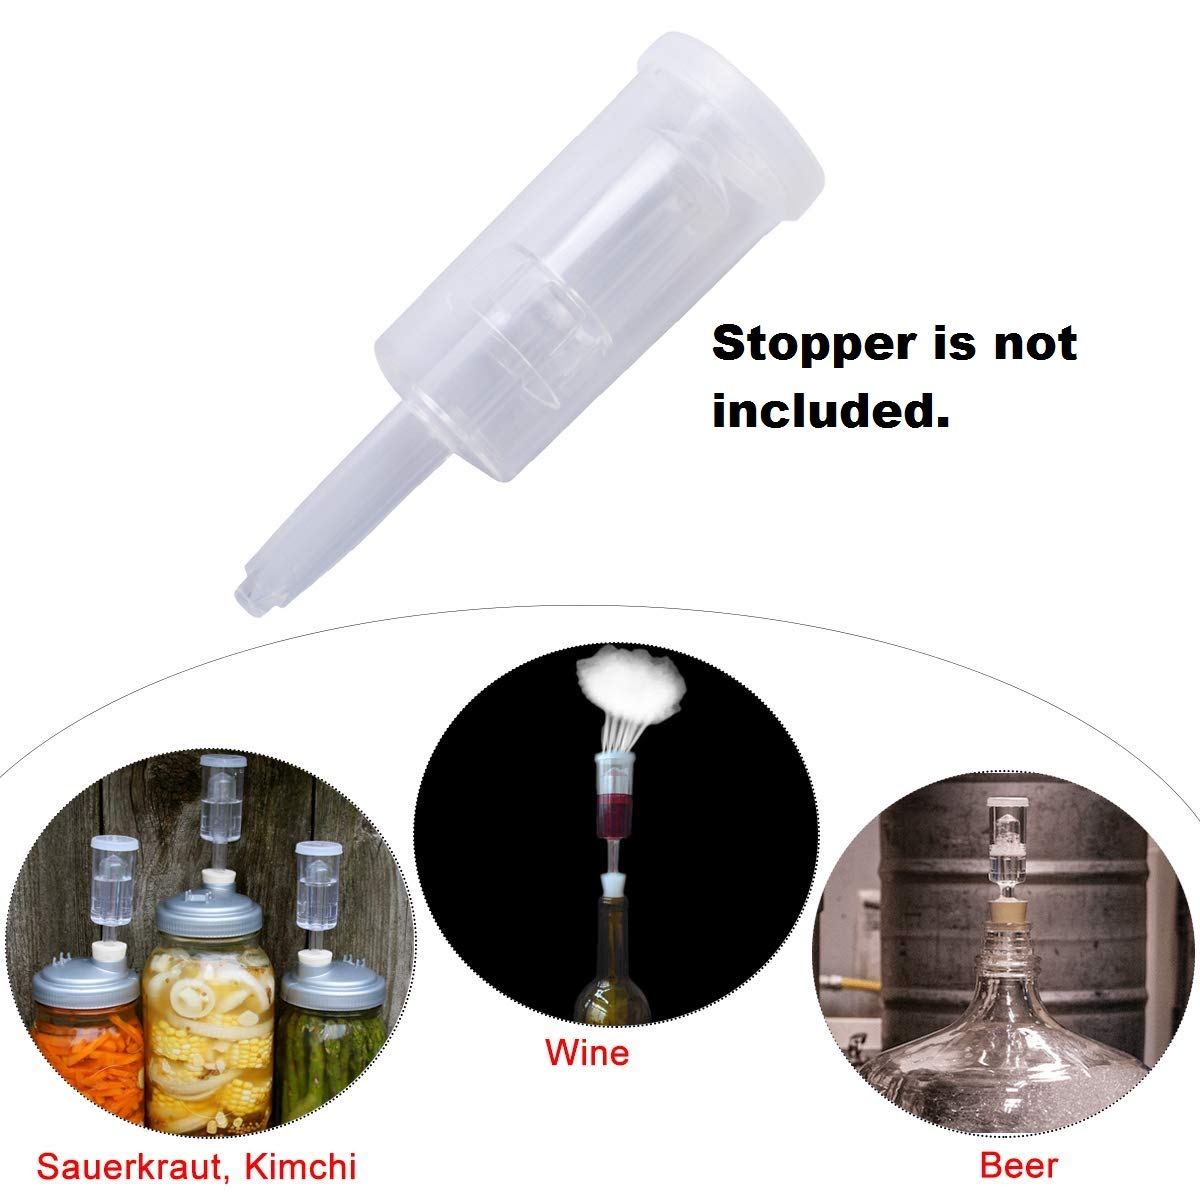 Nasmodo® airlock for Wine Making Fermentation Hydrolocks Plastic kit Beer Tool,Bubble Water Bottle Tube and Wine airlock Stopper Grommet Exhaust Seal Valves for Home Brew